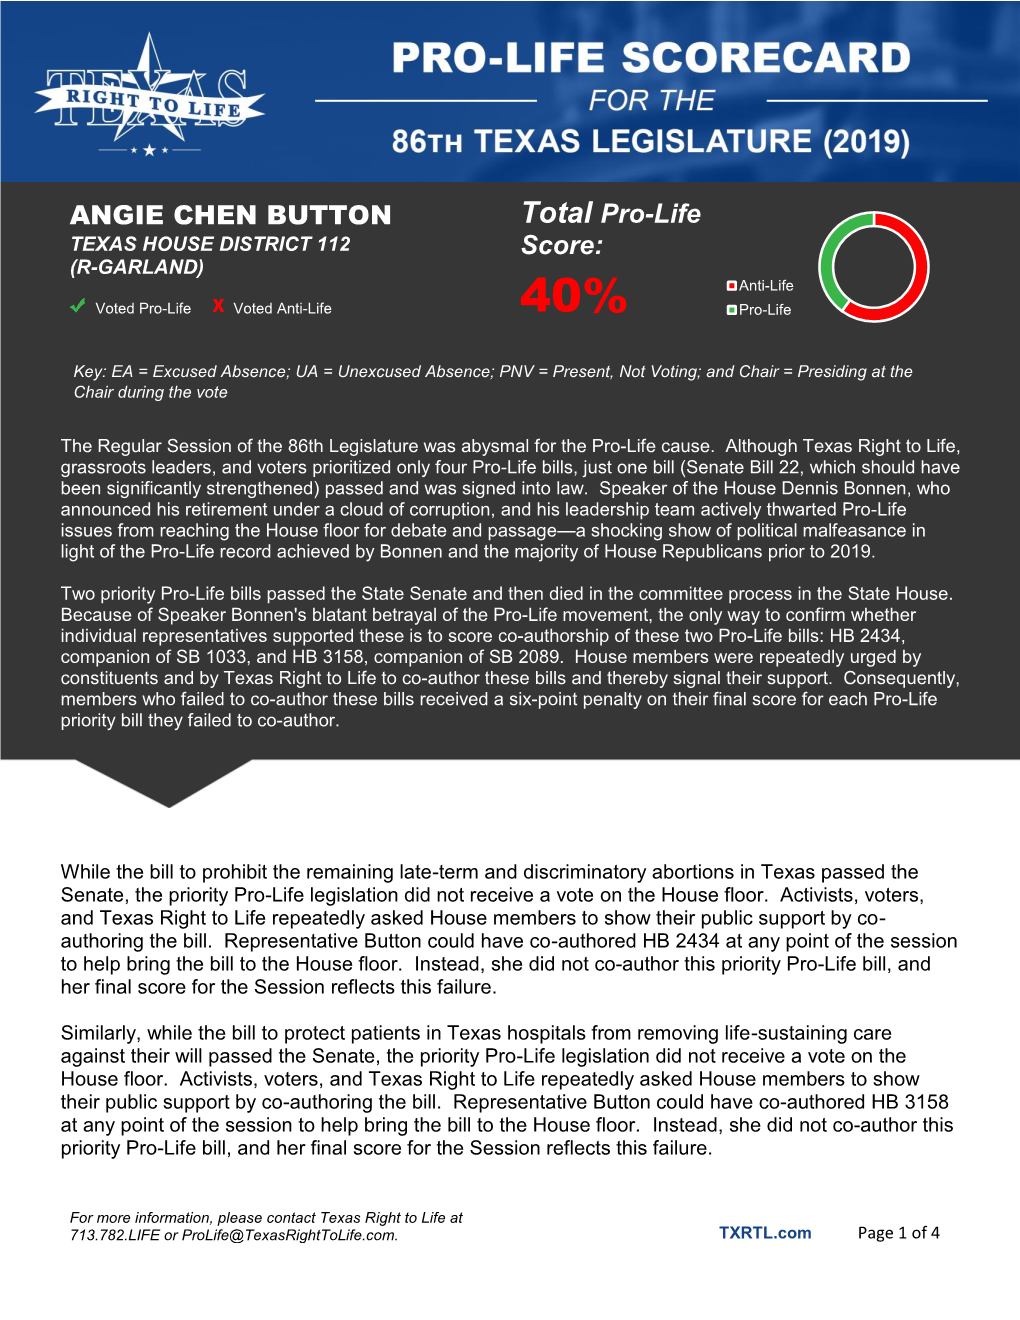 ANGIE CHEN BUTTON Total Pro-Life Score